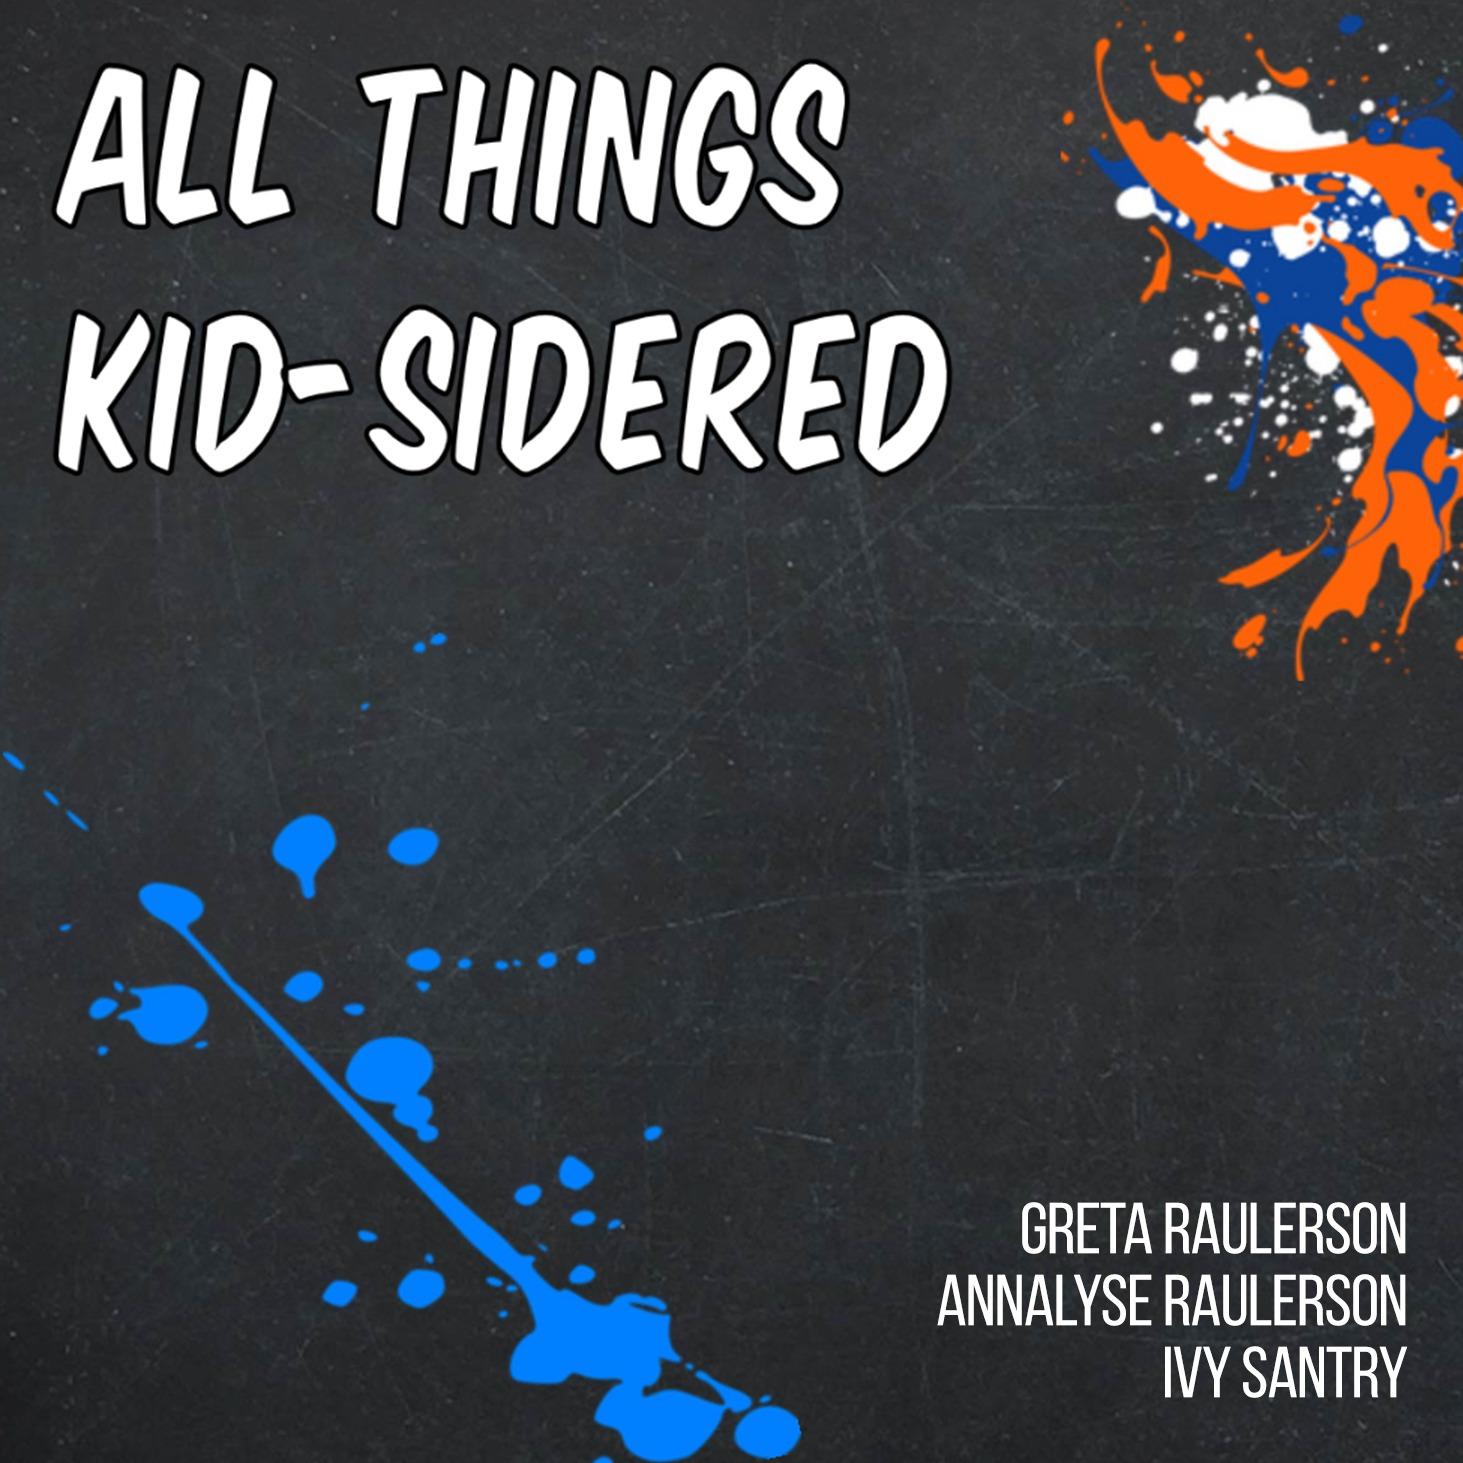 All Things Kid-sidered